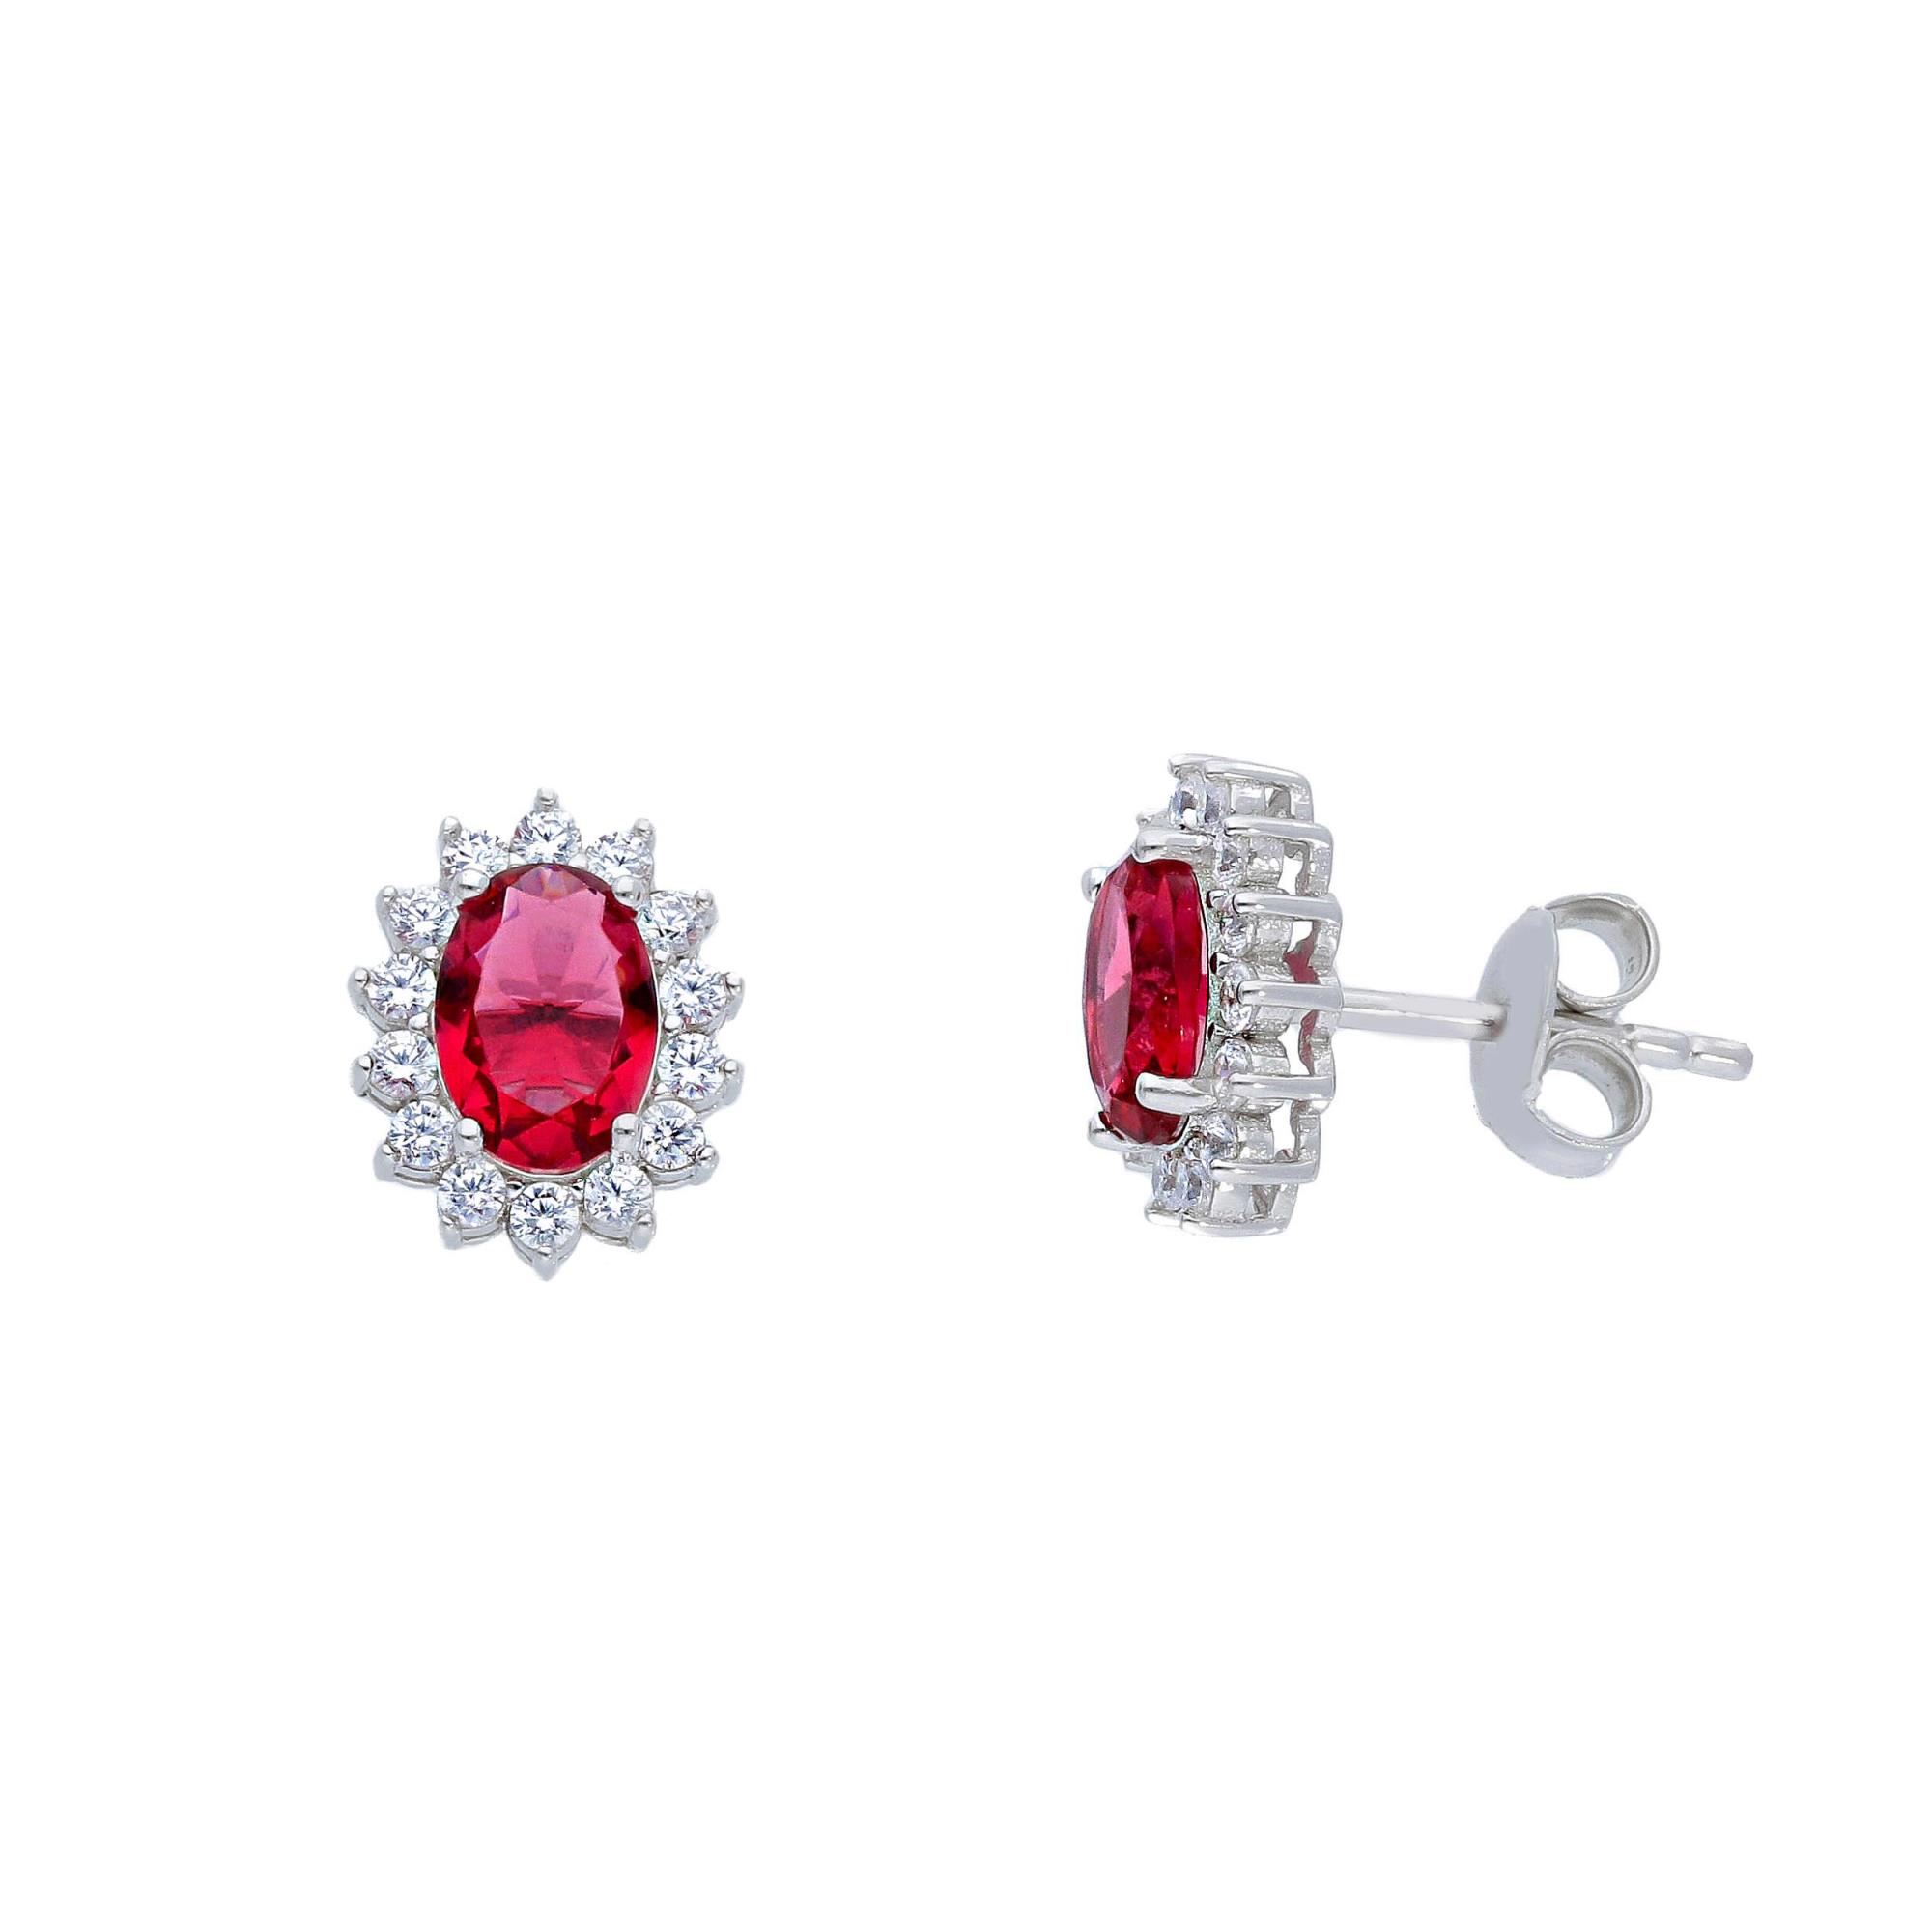 Silver earrings with red and white zircons - ORO&CO 925